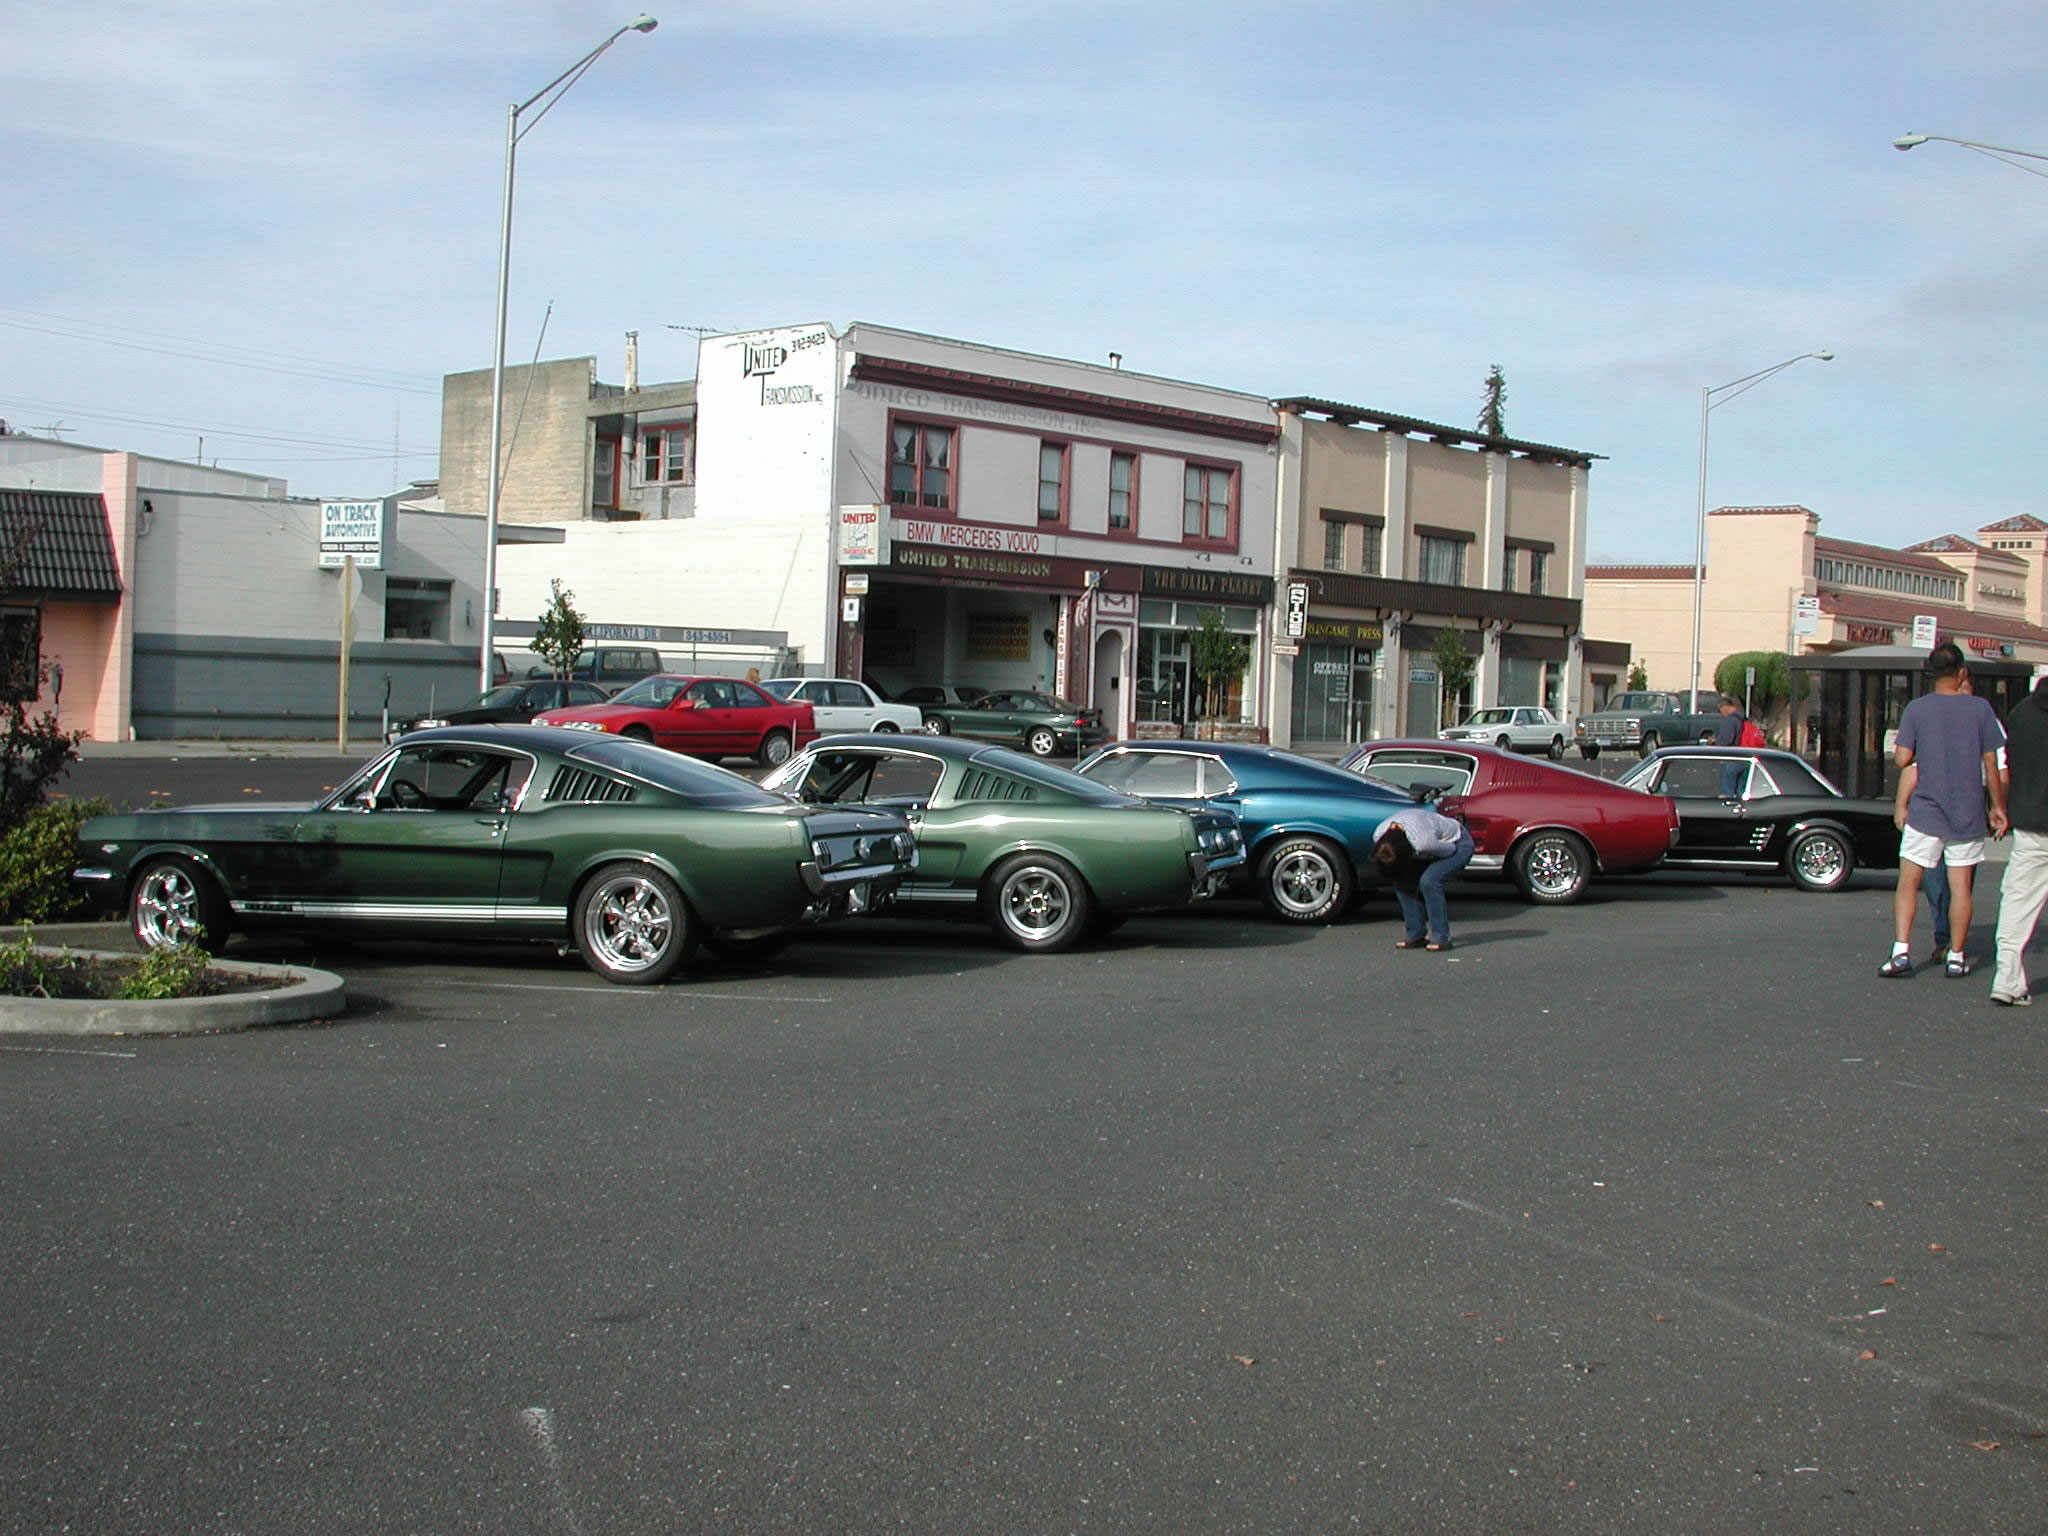 NorCal-VMF Cruise #3 pre-cruise cars.  What's she looking at?